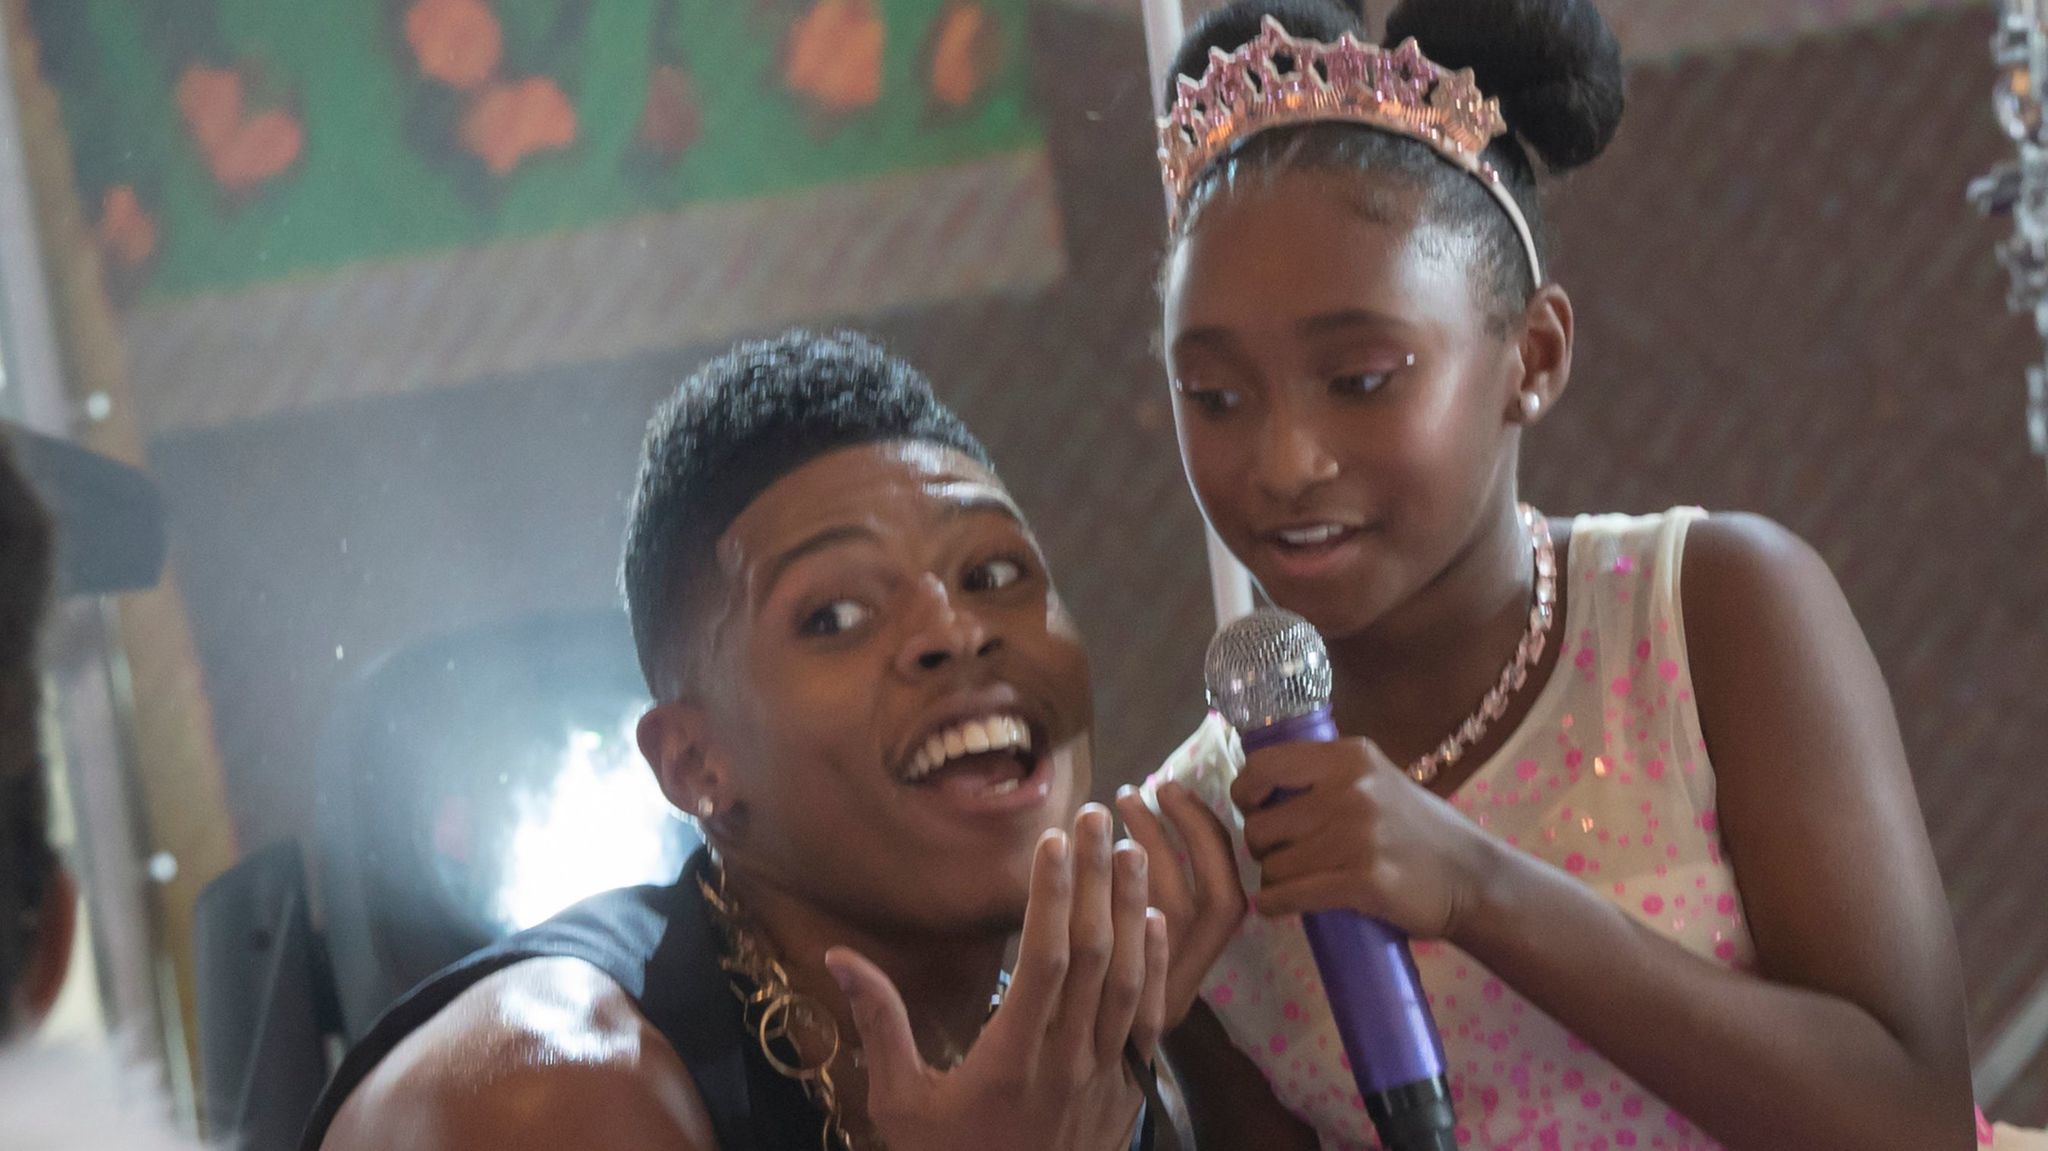 Go behind the scenes of the Prince-themed episode of 'Empire' filmed on